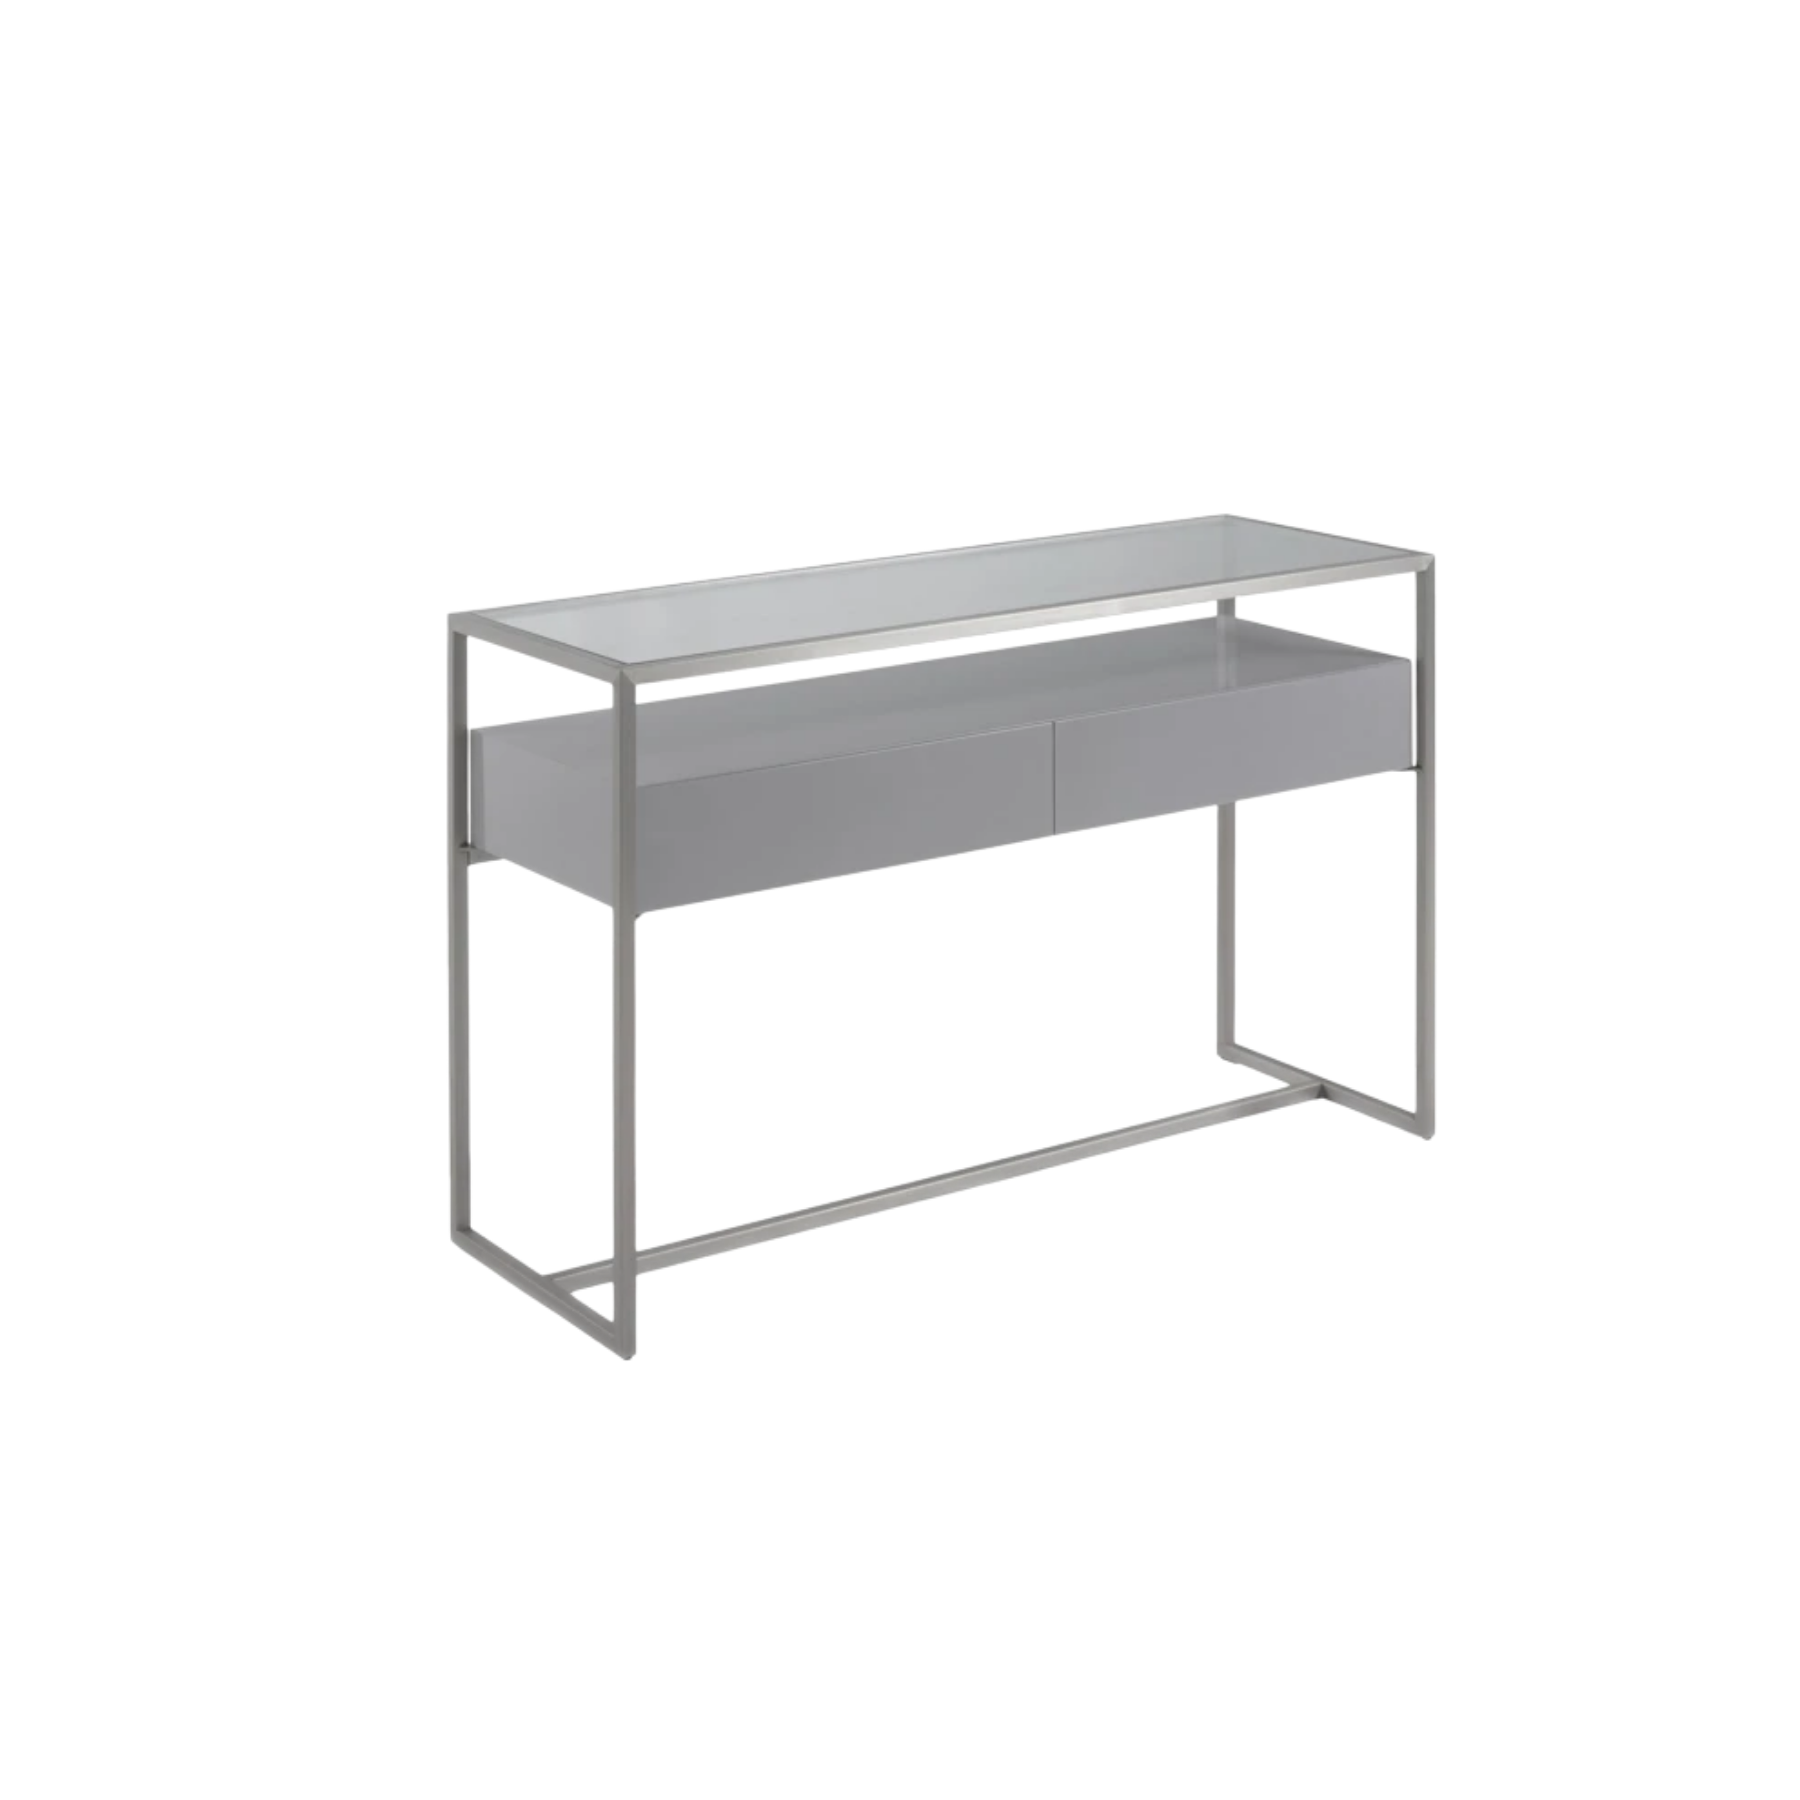 Alfred console with smoke glass, brushed metal, and 2 drawers matt dark grey 